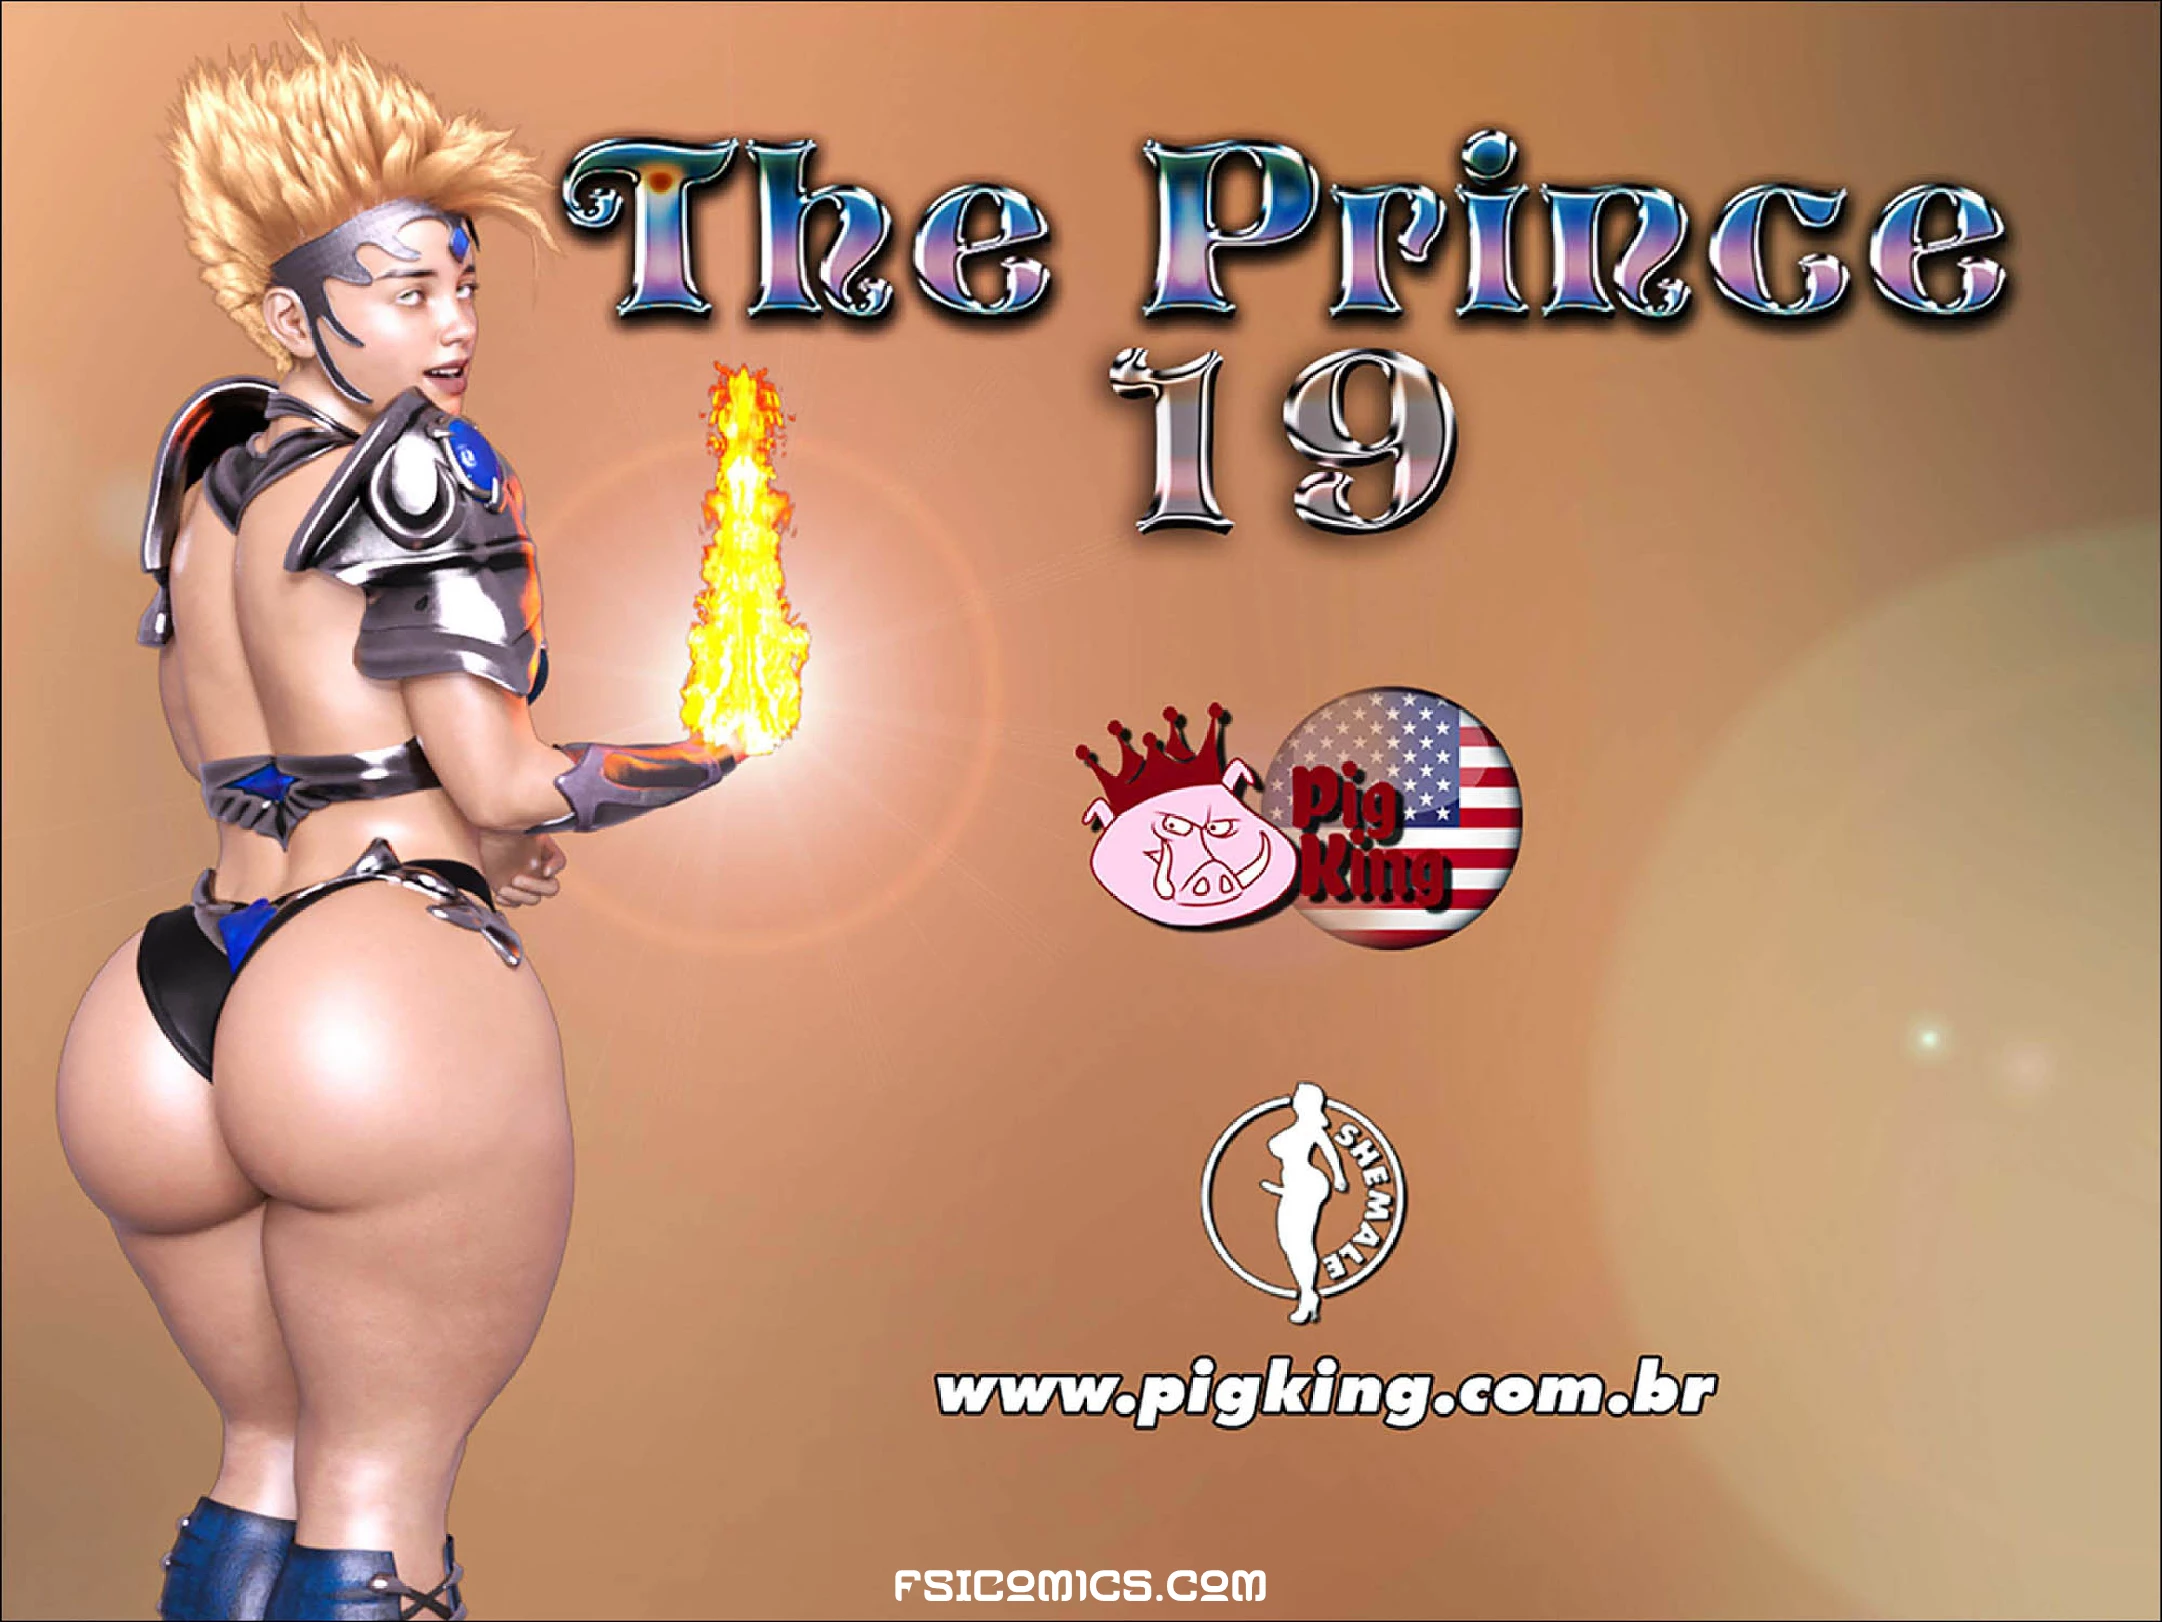 The Prince Chapter 19 – PigKing - 194 - FSIComics